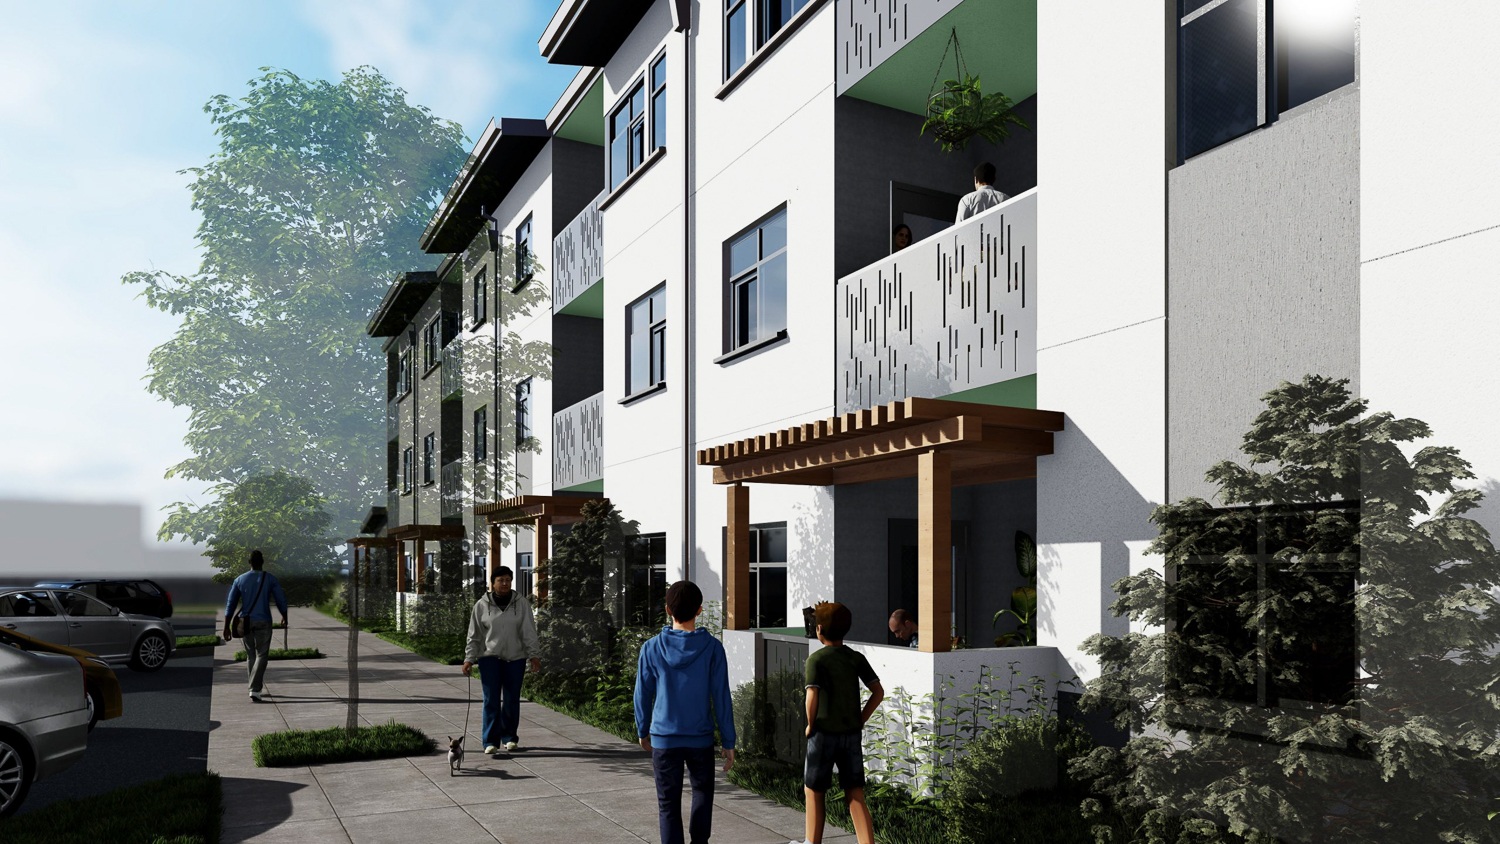 Casa Roseland Family Apartments streetscape, rendering by VMWP Architects